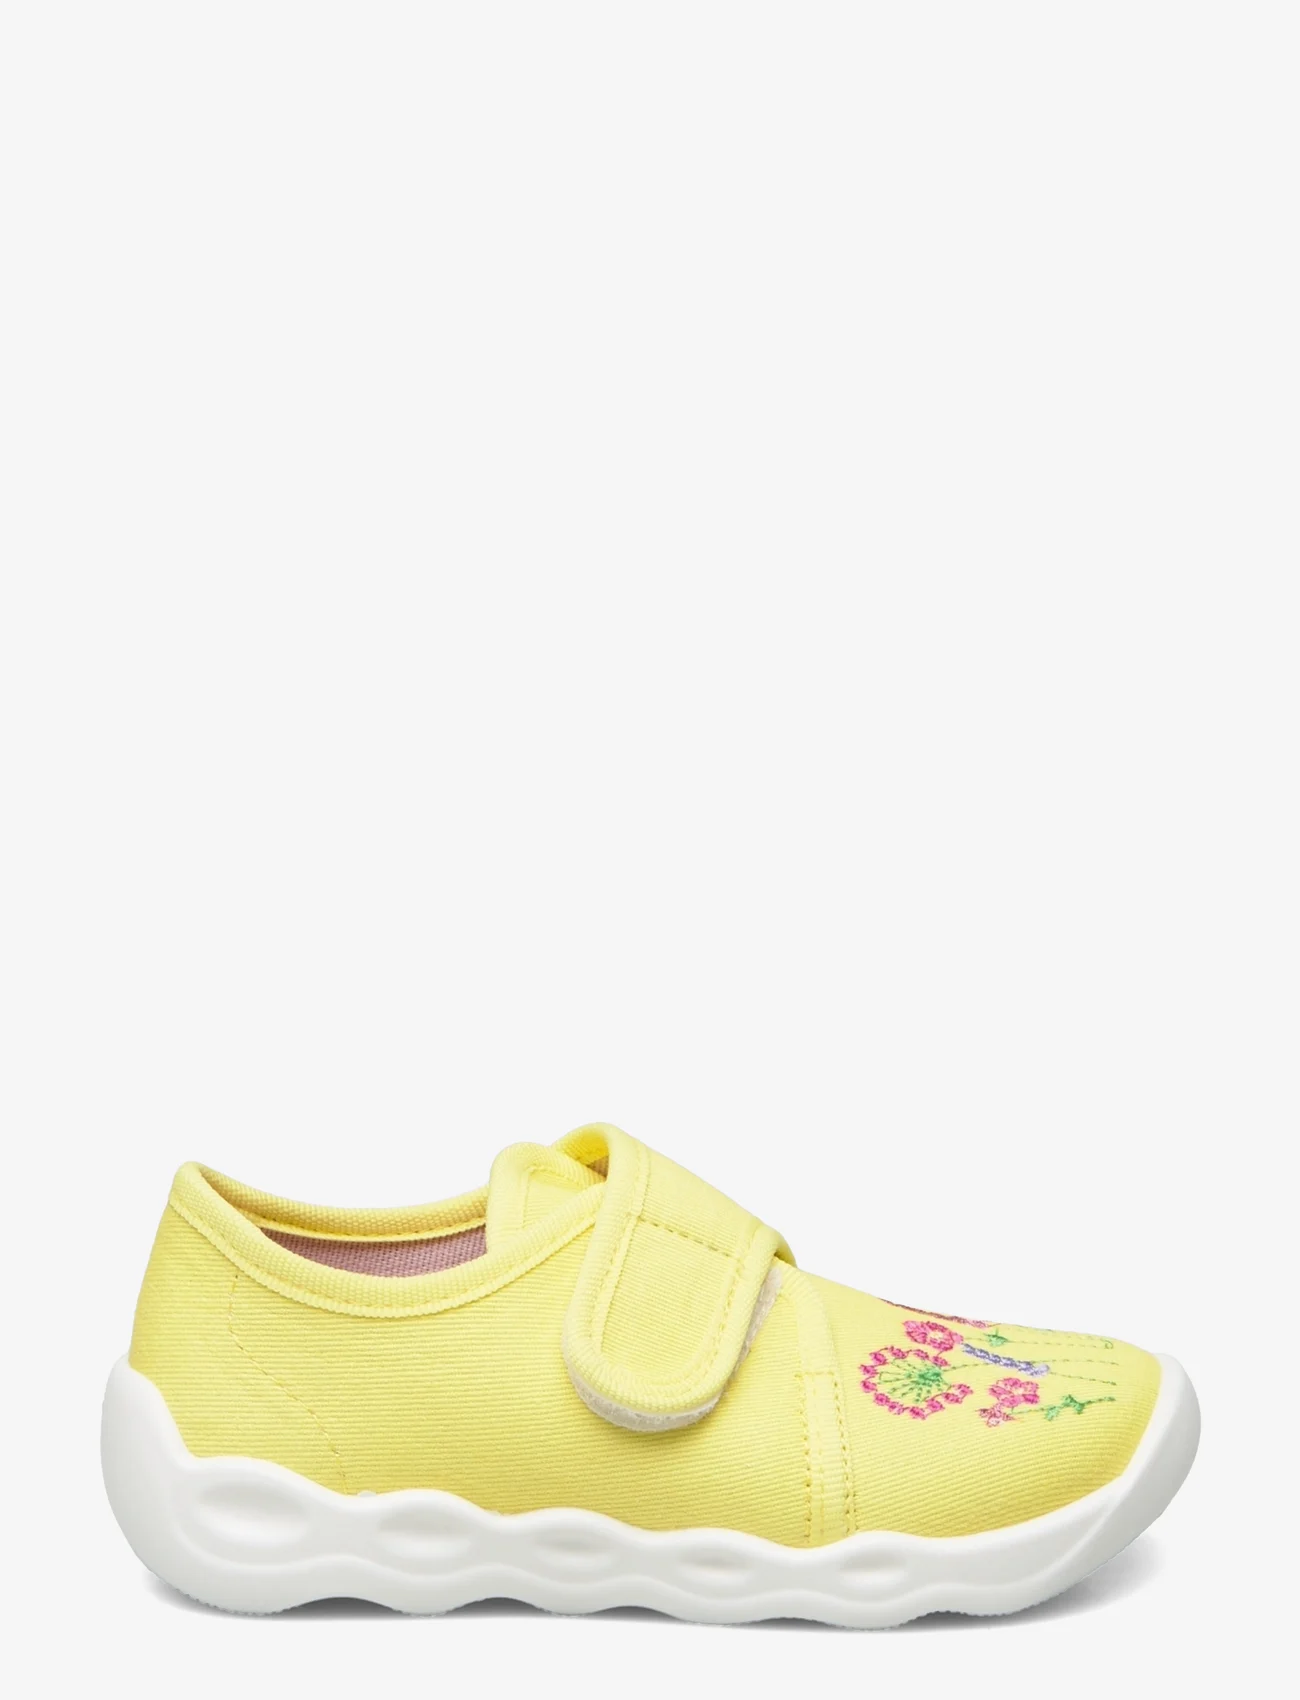 Superfit - BUBBLE - tygsneakers - yellow - 1